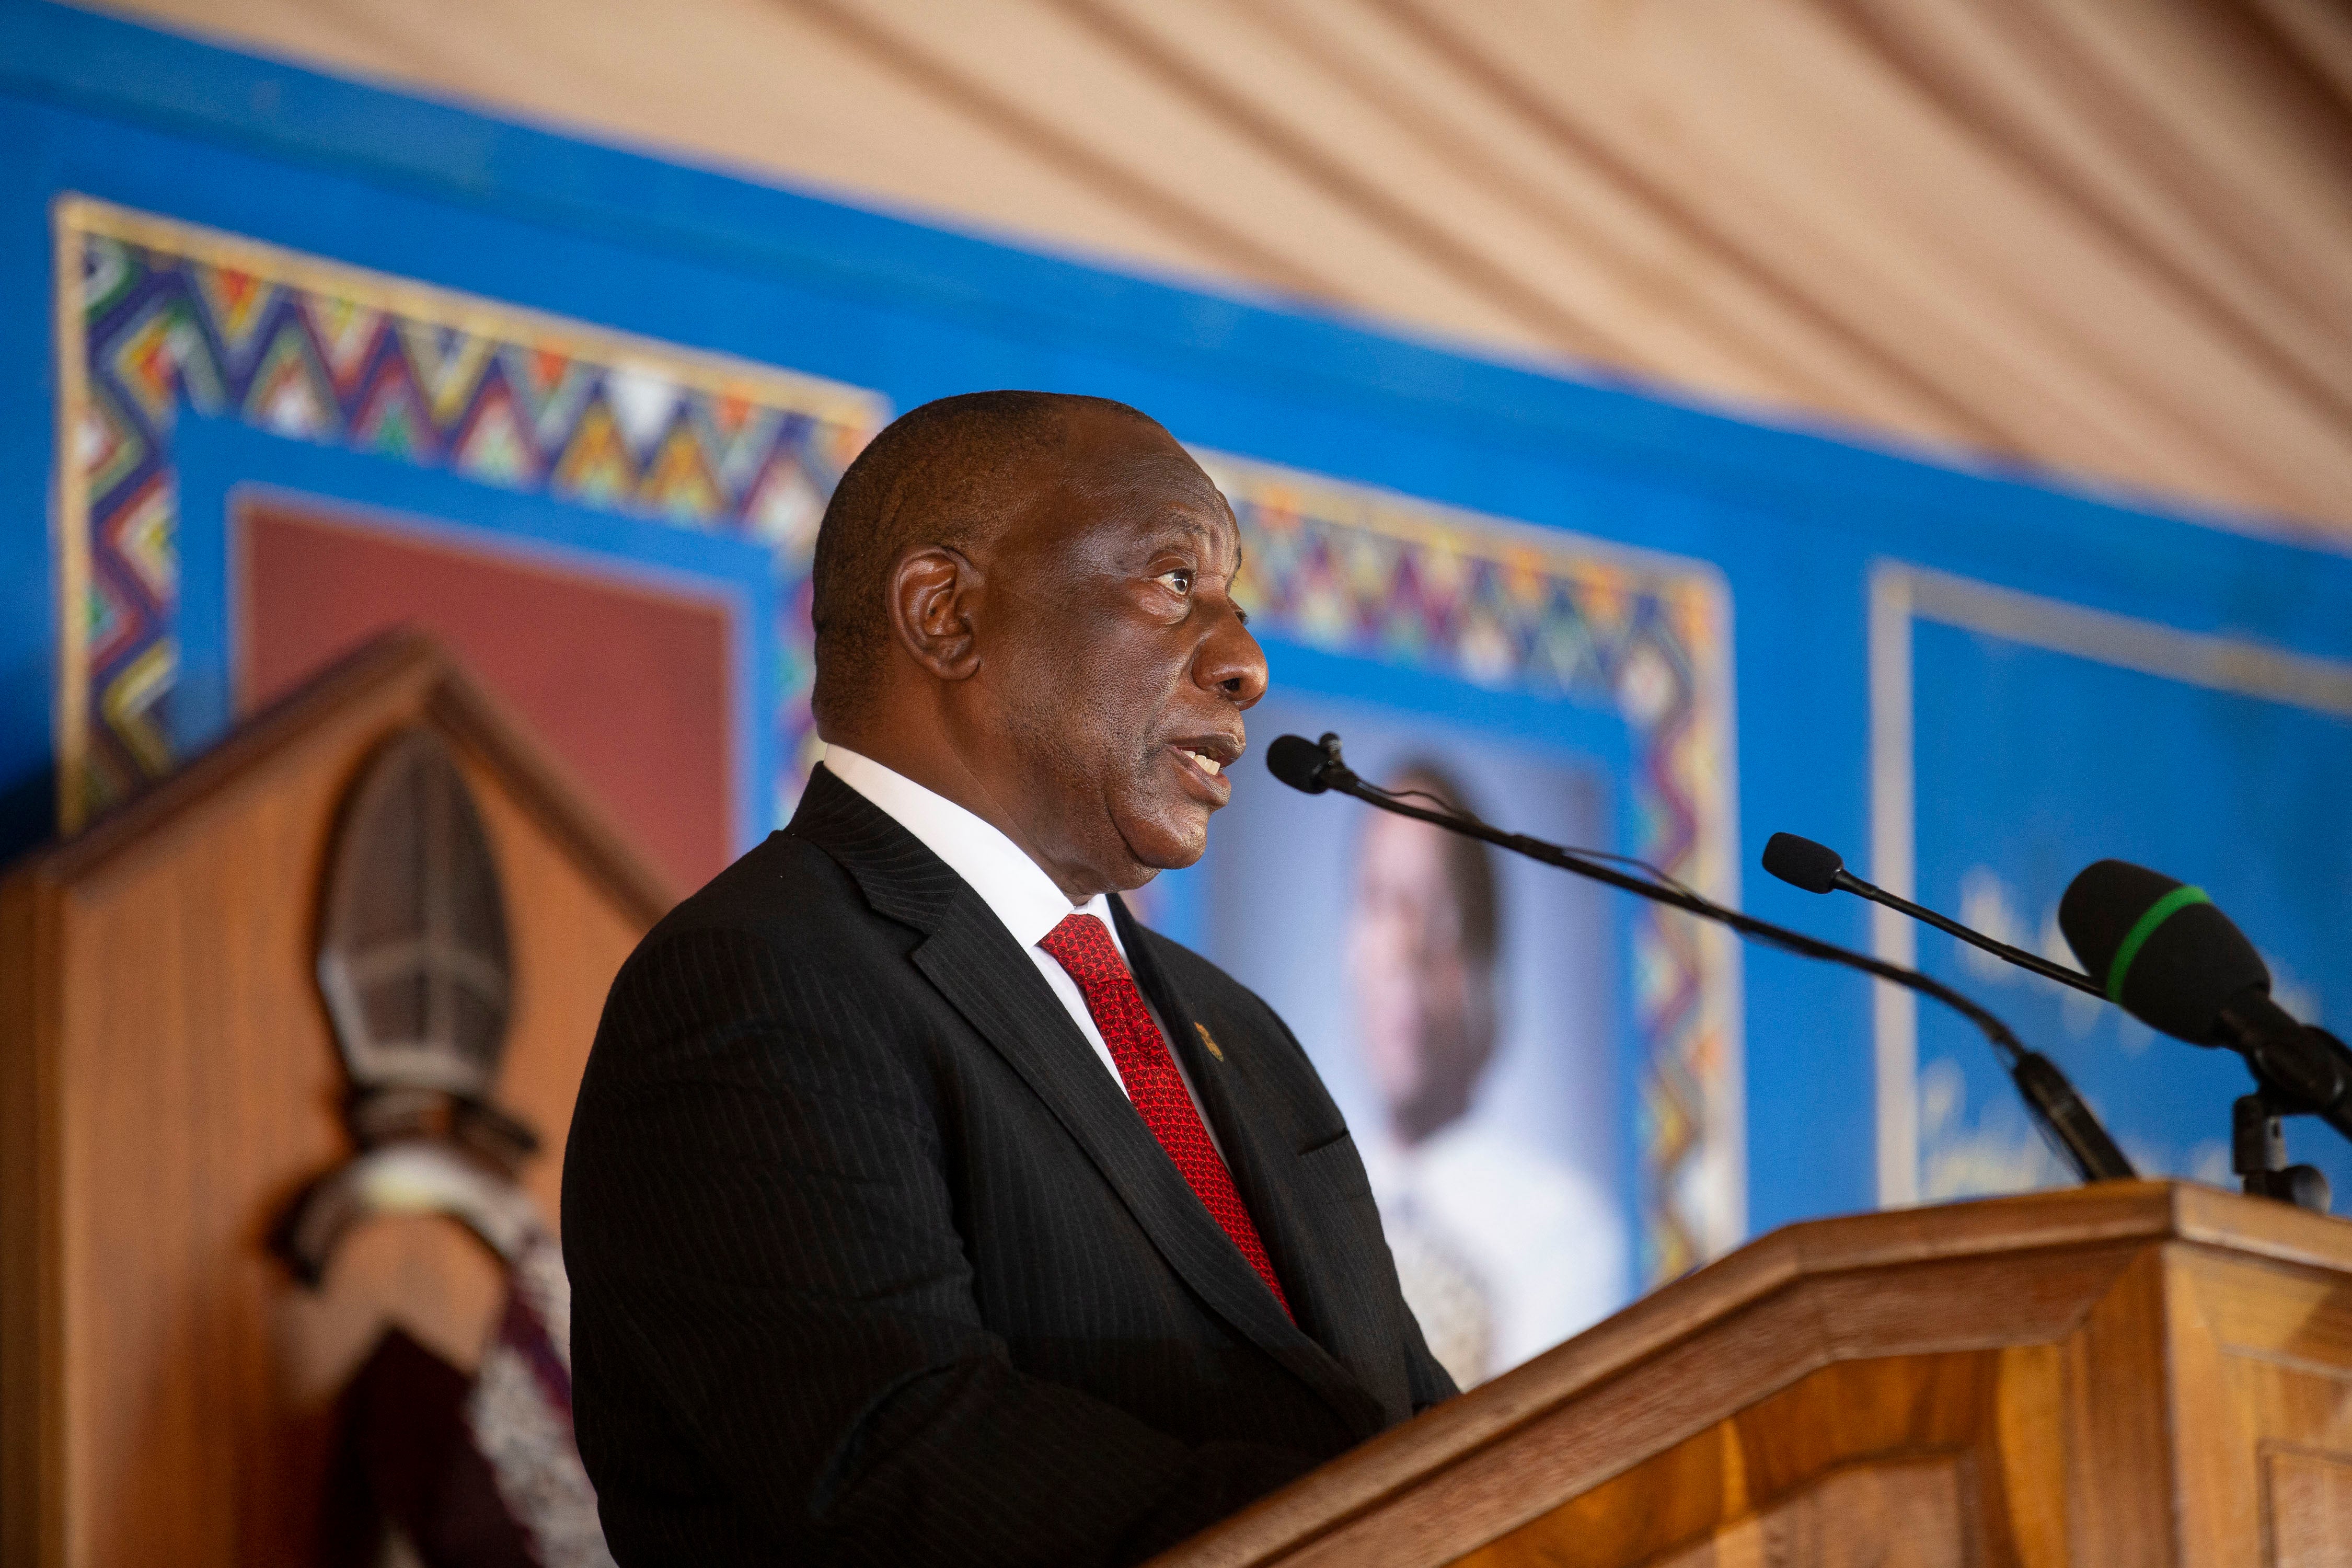 South African president Cyril Ramaphosa officially recognised Misuzulu as the next king